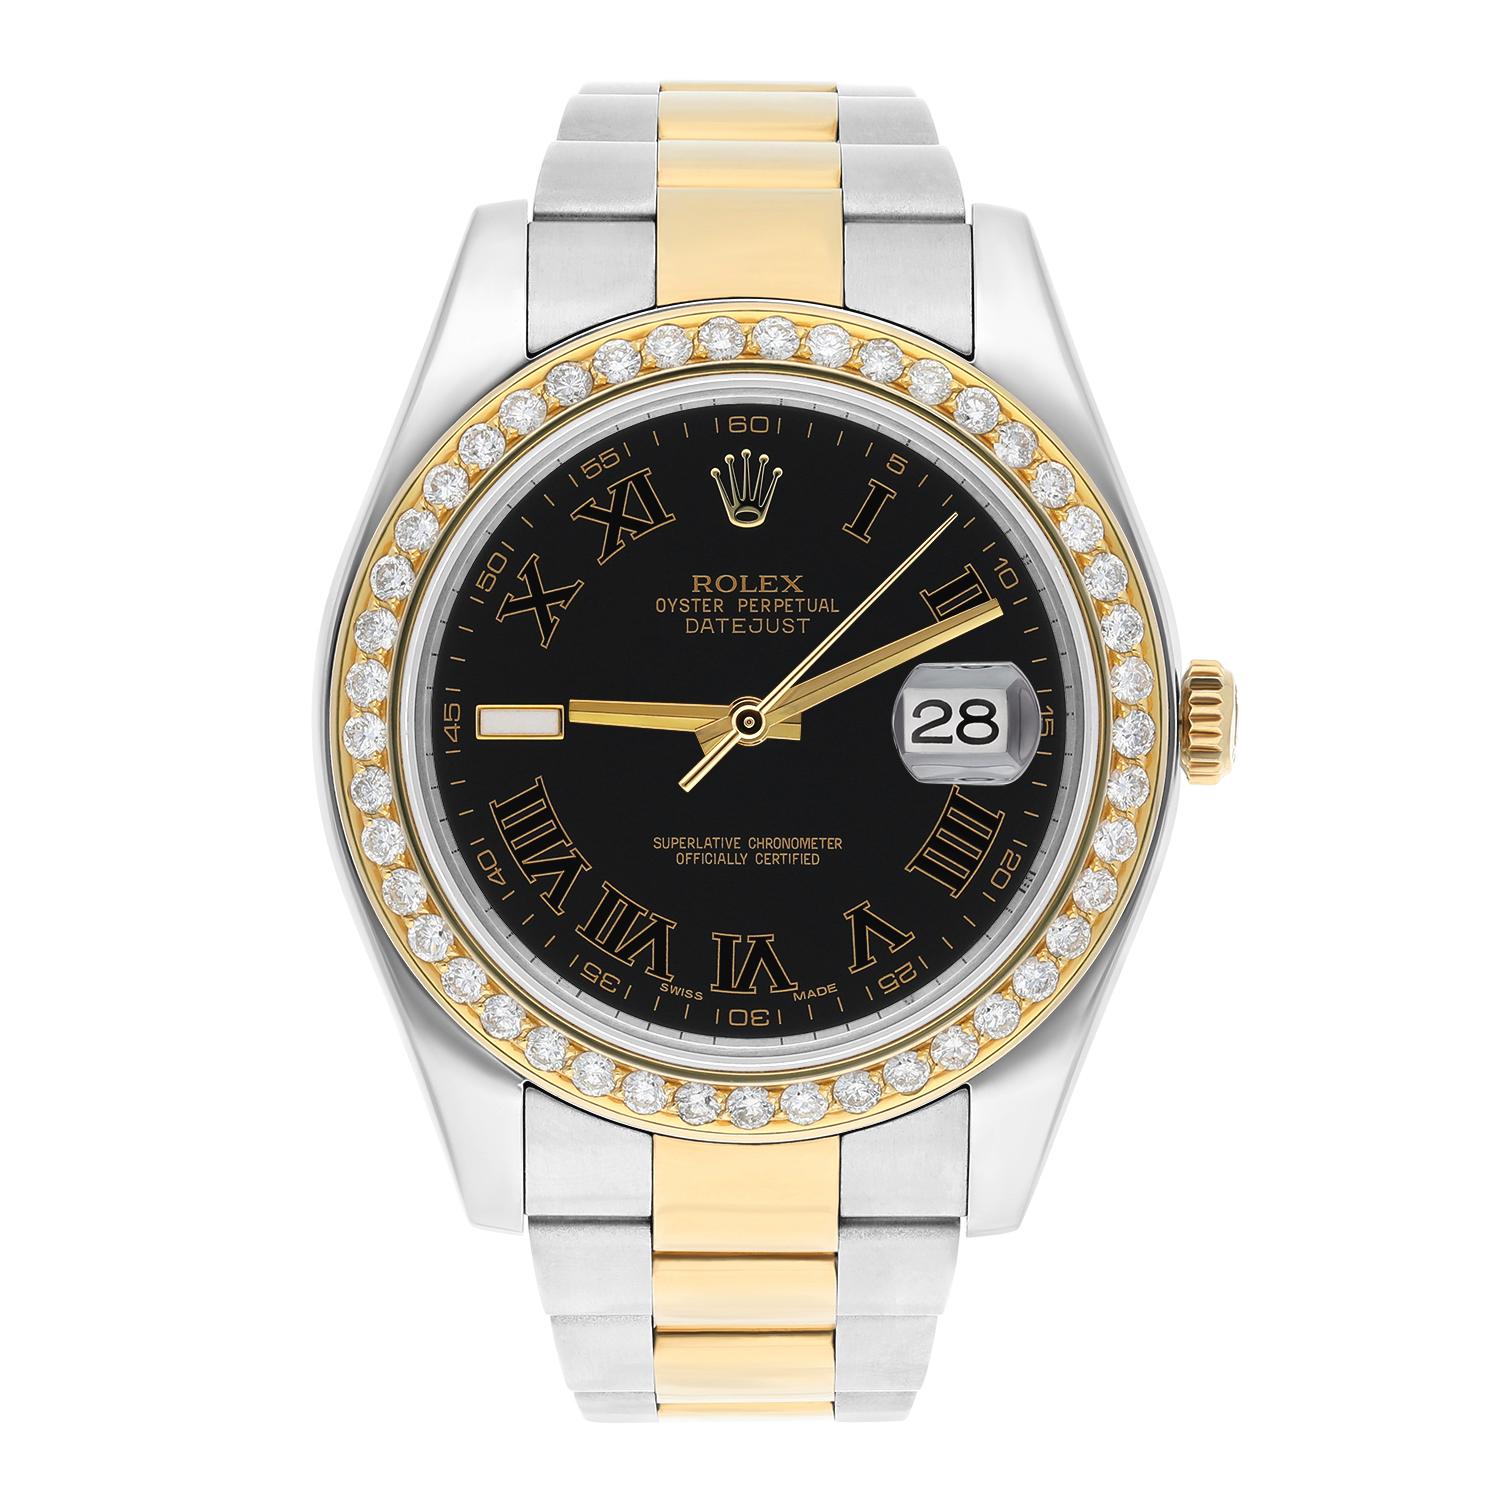 Brand: Rolex
Series: Datejust
Model: 116333
Case Diameter: 41 mm
Bracelet: Oyster band; stainless steel and 18K Yellow Gold
Bezel: Custom Diamond Set, 18K Gold Plated
Dial: Black dial
The sale includes a jewelry watch box and an appraisal